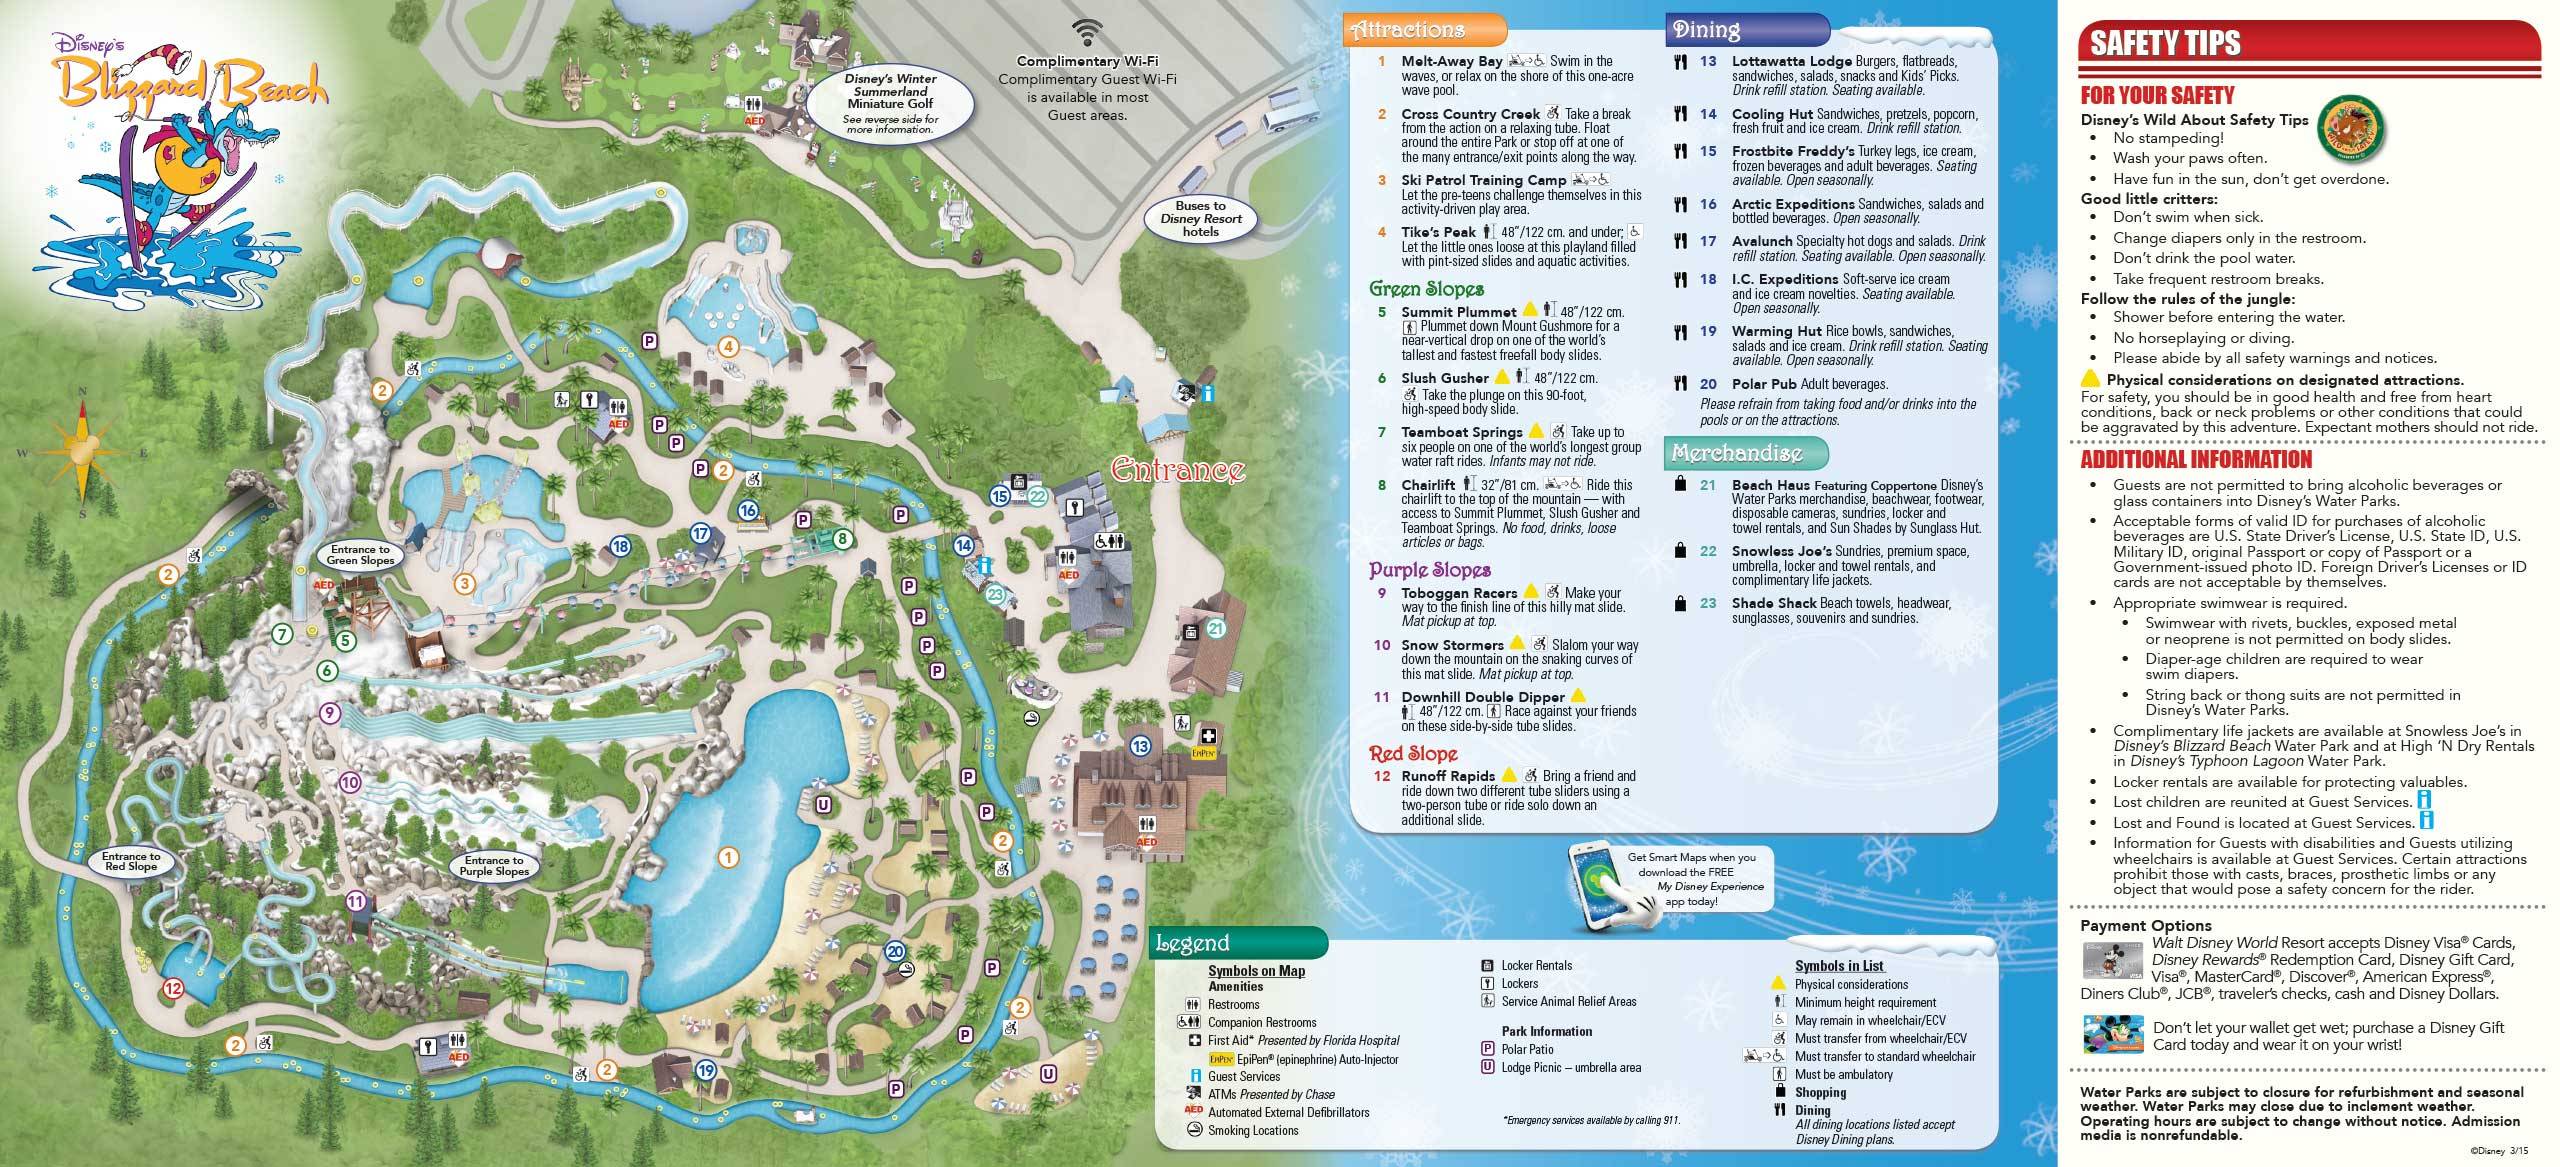 Water Park Guide Map May 2015 - Blizzard Beach